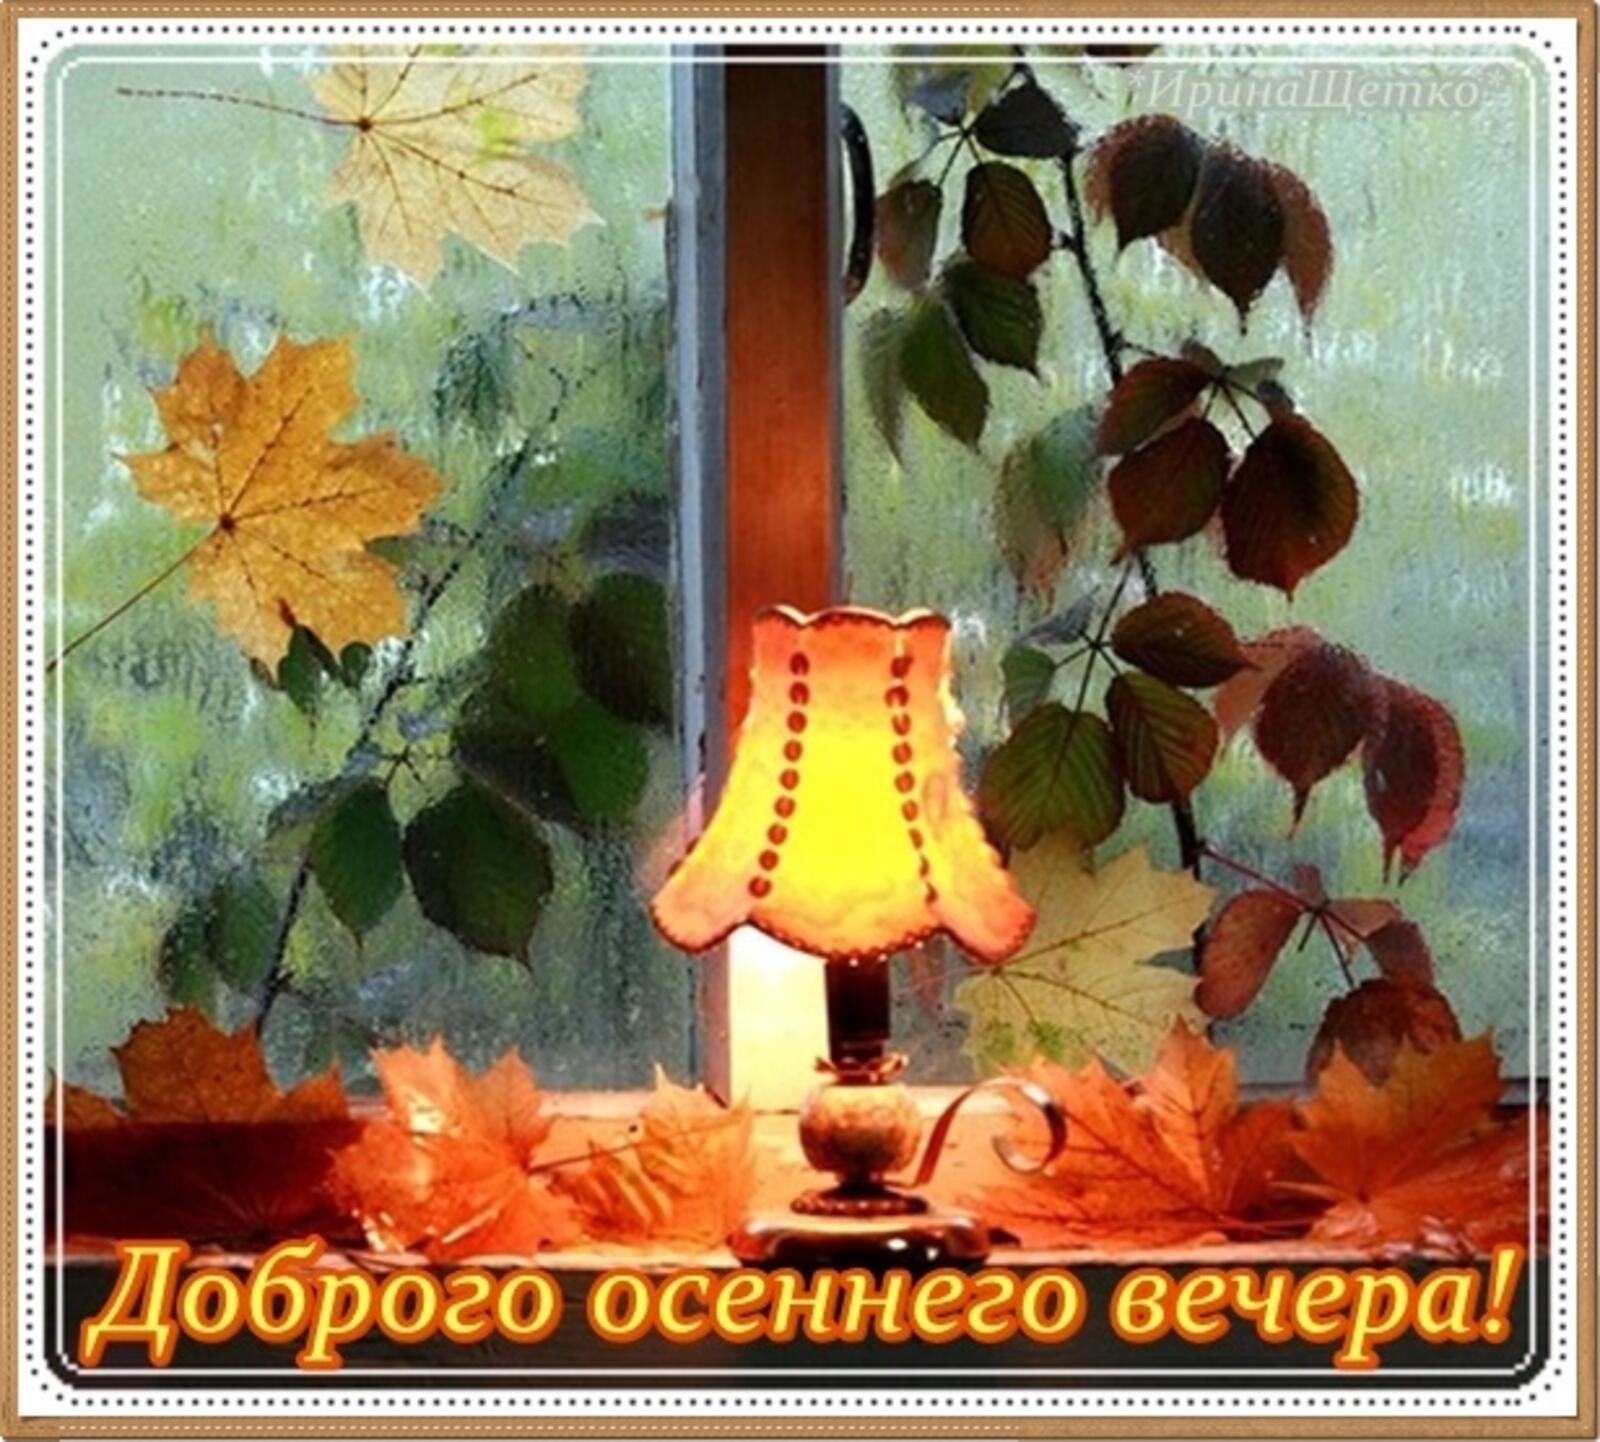 Have a nice fall evening